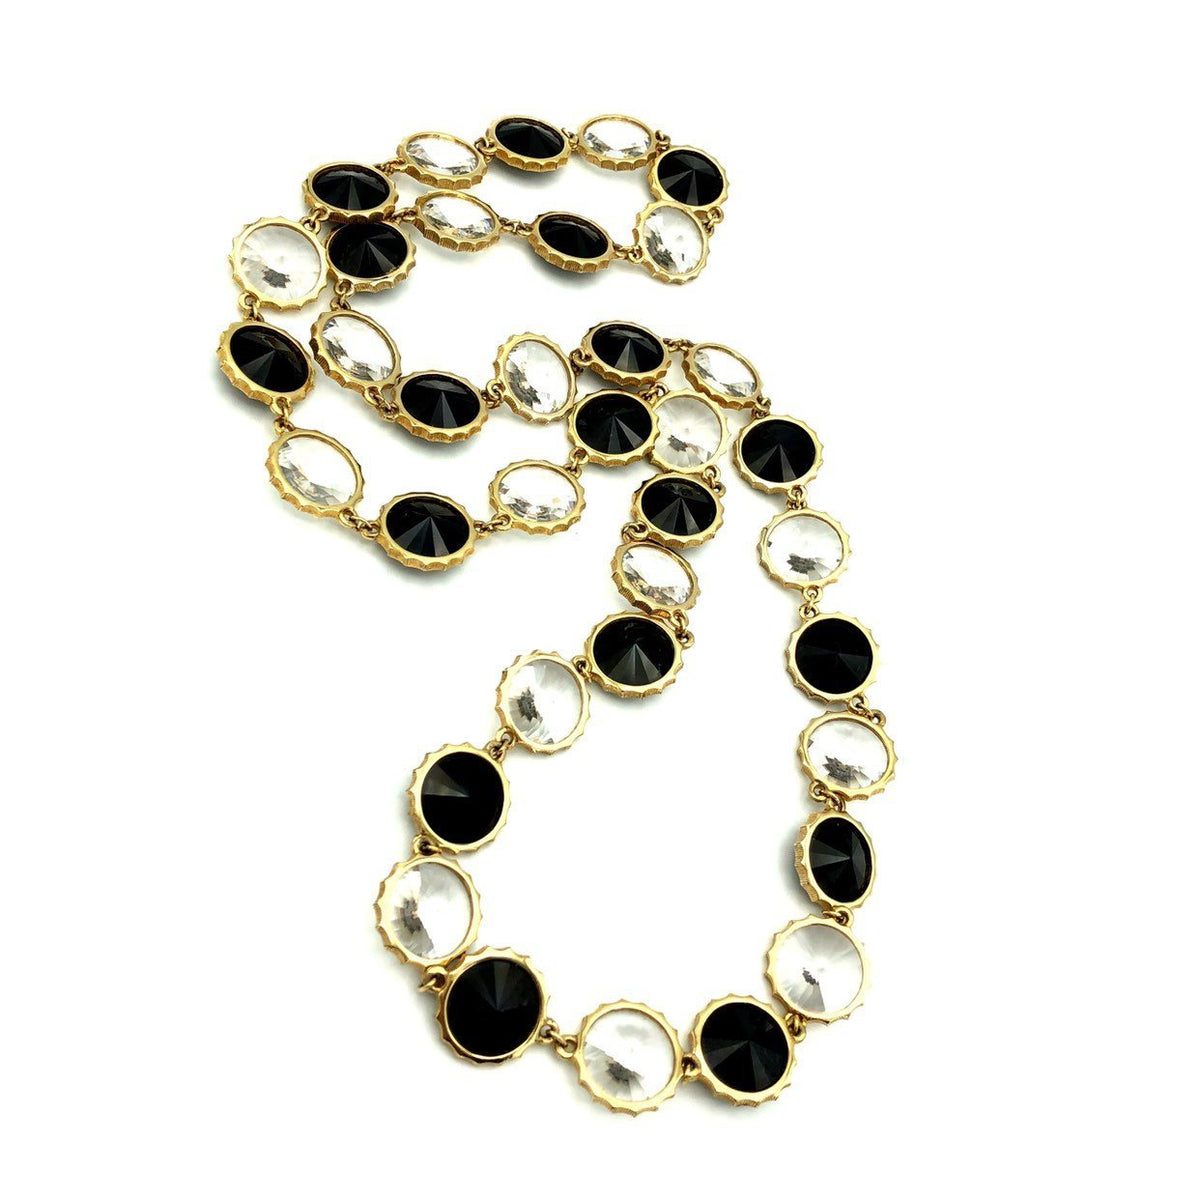 Vintage Black & White Chaton Faceted Rivoli Long Necklace - 24 Wishes Vintage Jewelry